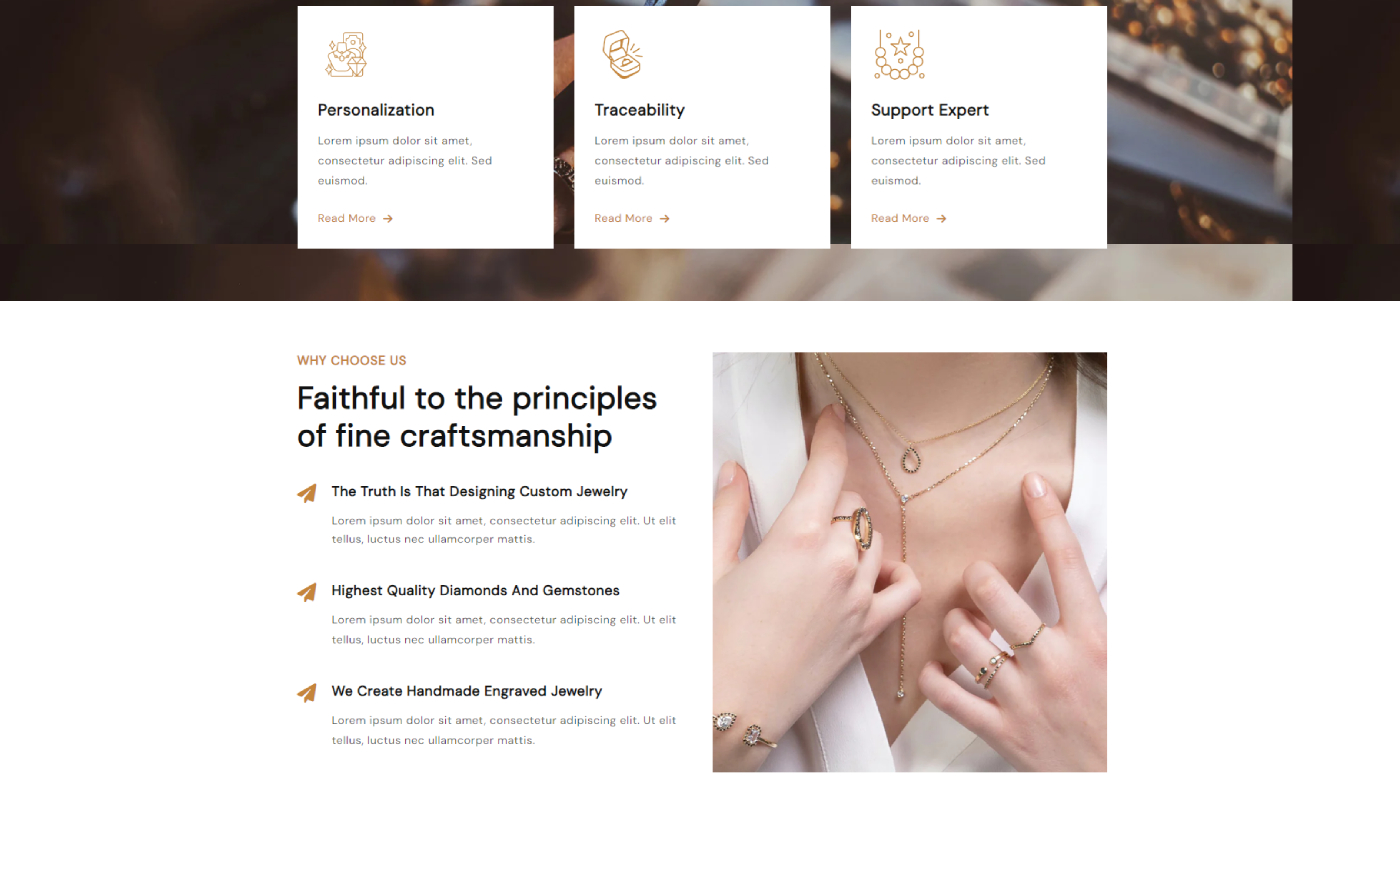 Finessify - Jewelry Store Shopify template built by Pagefly